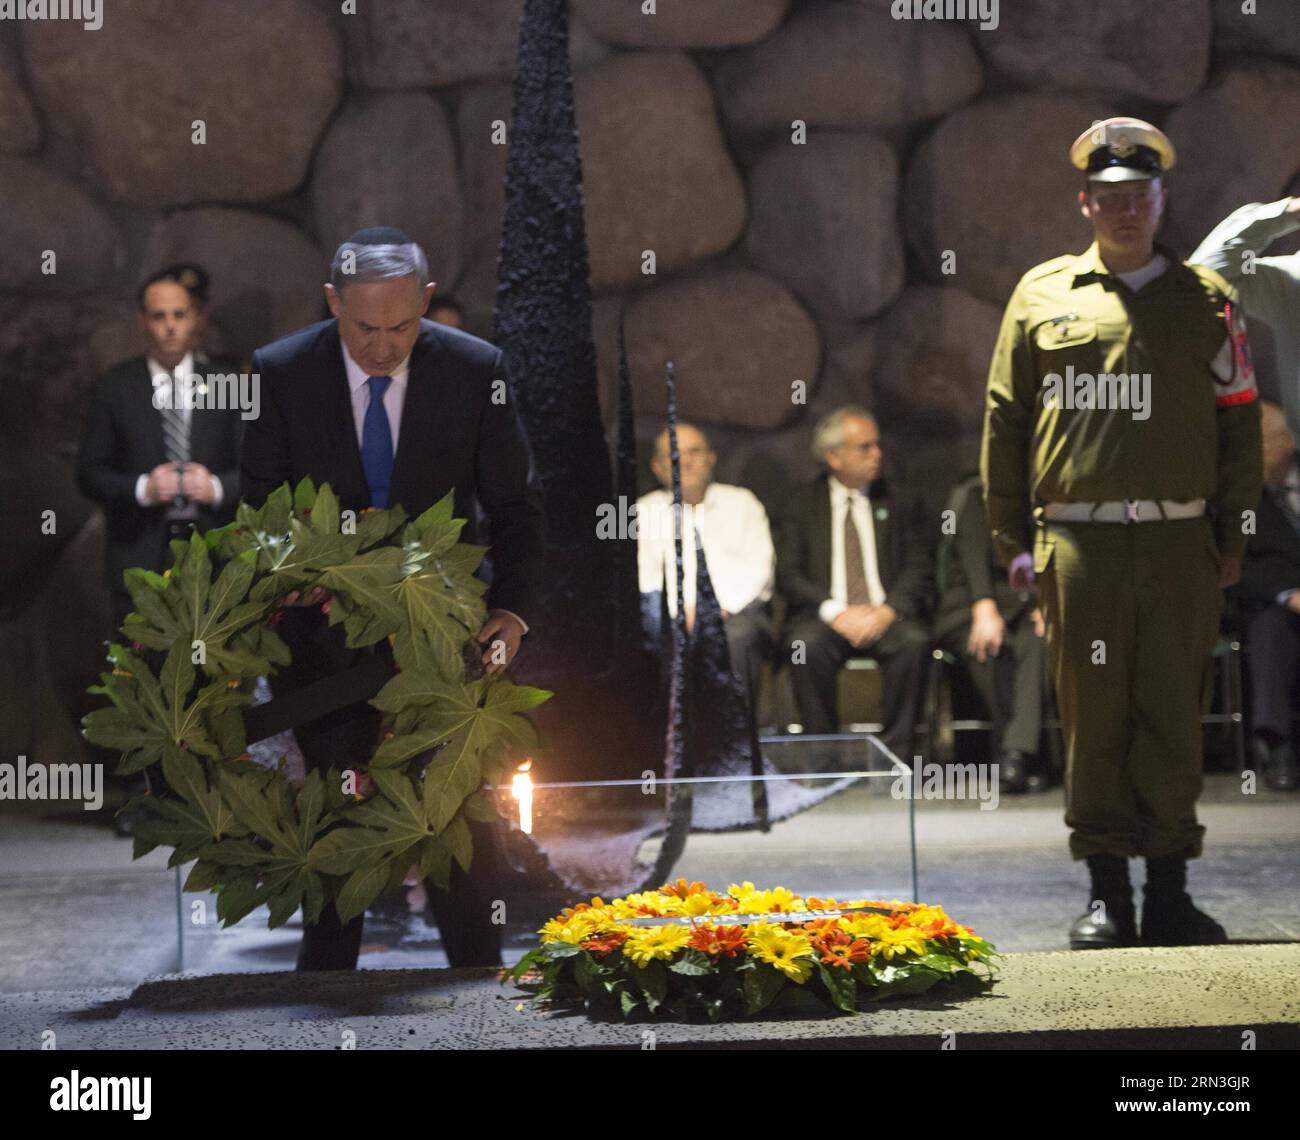 (150416) -- JERUSALEM, April 16, 2015 -- Israeli Prime Minister Benjamin Netanyahu (front) lays a wreath for holocaust victims during the Holocaust Remembrance Day at the Yad Vashem Holocaust Memorial Museum in Jerusalem, on April 16, 2015. From Wednesday sunset to Thursday, Israel officially commemorated the genocide of six million Jews by Nazi Germany during the World War II. GPO/) (djj) MIDEAST-JERUSALEM-HOLOCAUST REMEMBRANCE DAY AmosxBenxGershom PUBLICATIONxNOTxINxCHN   Jerusalem April 16 2015 Israeli Prime Ministers Benjamin Netanyahu Front Lays a  for Holocaust Victims during The Holocau Stock Photo